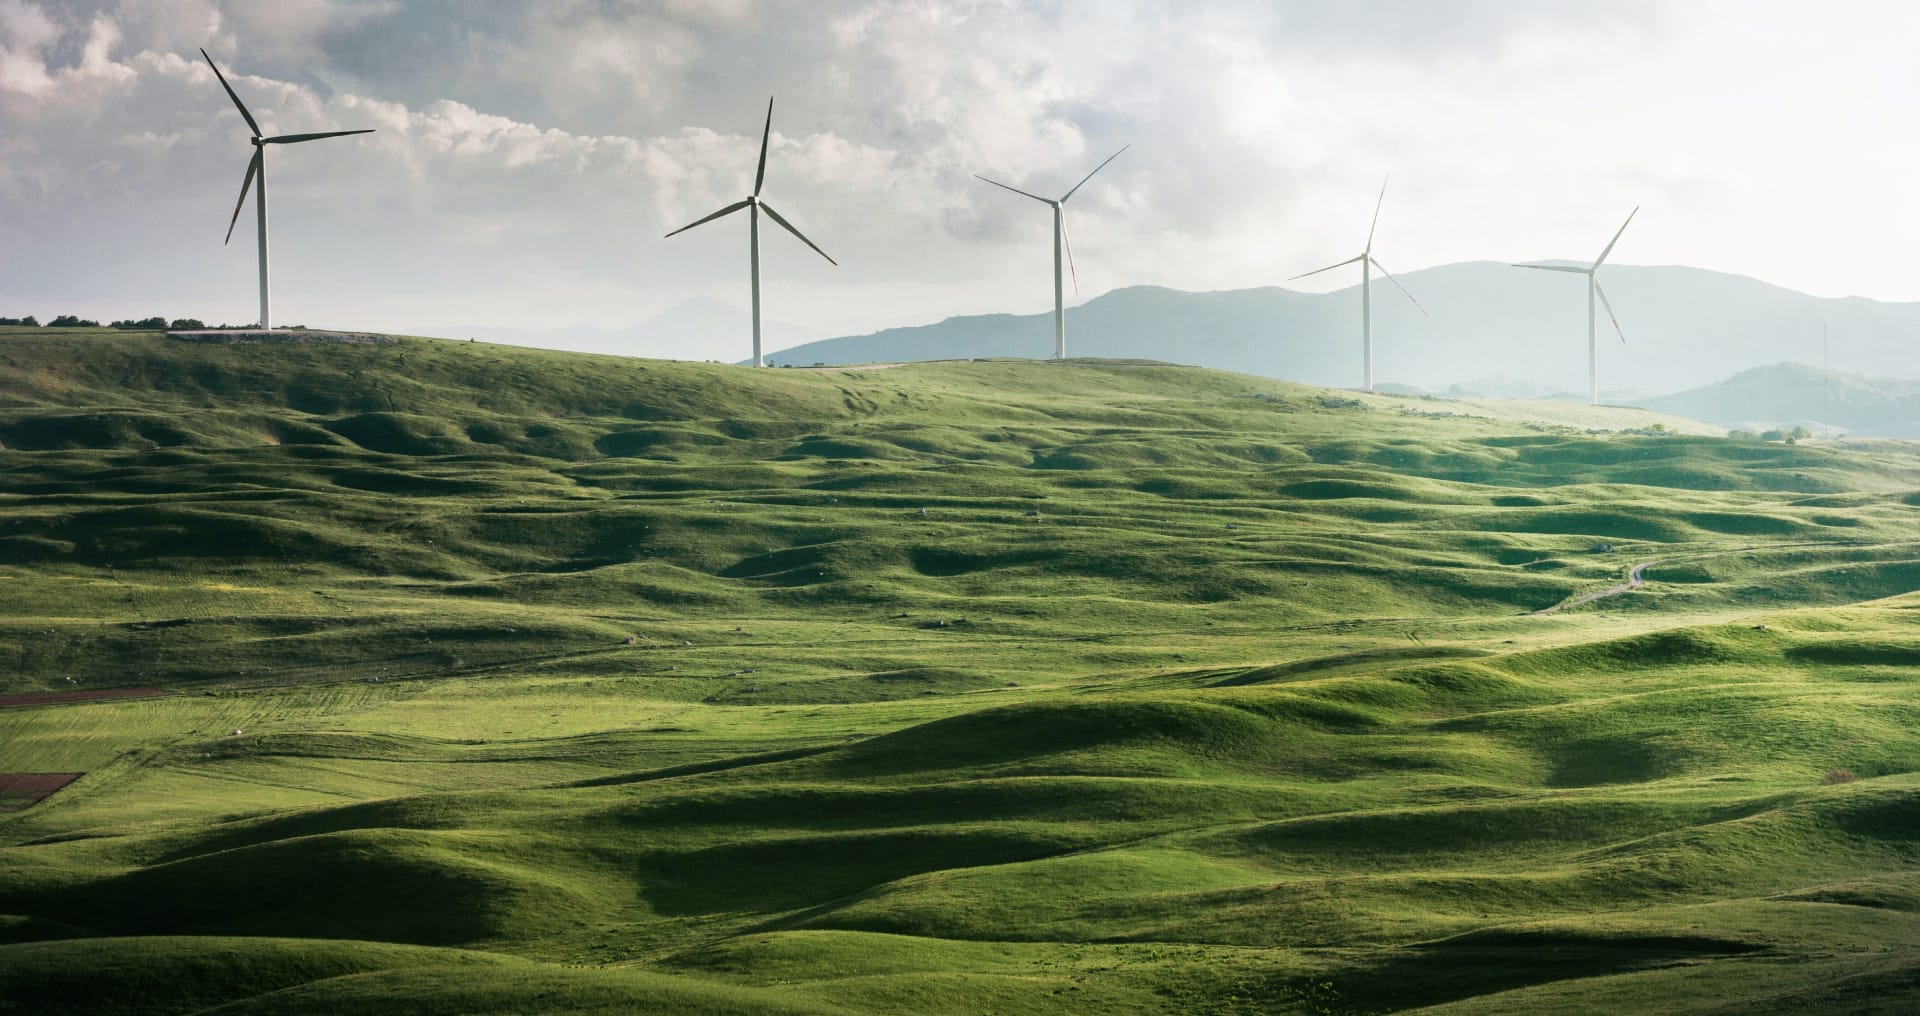 Wind turbines in a sunny, hilly, green field